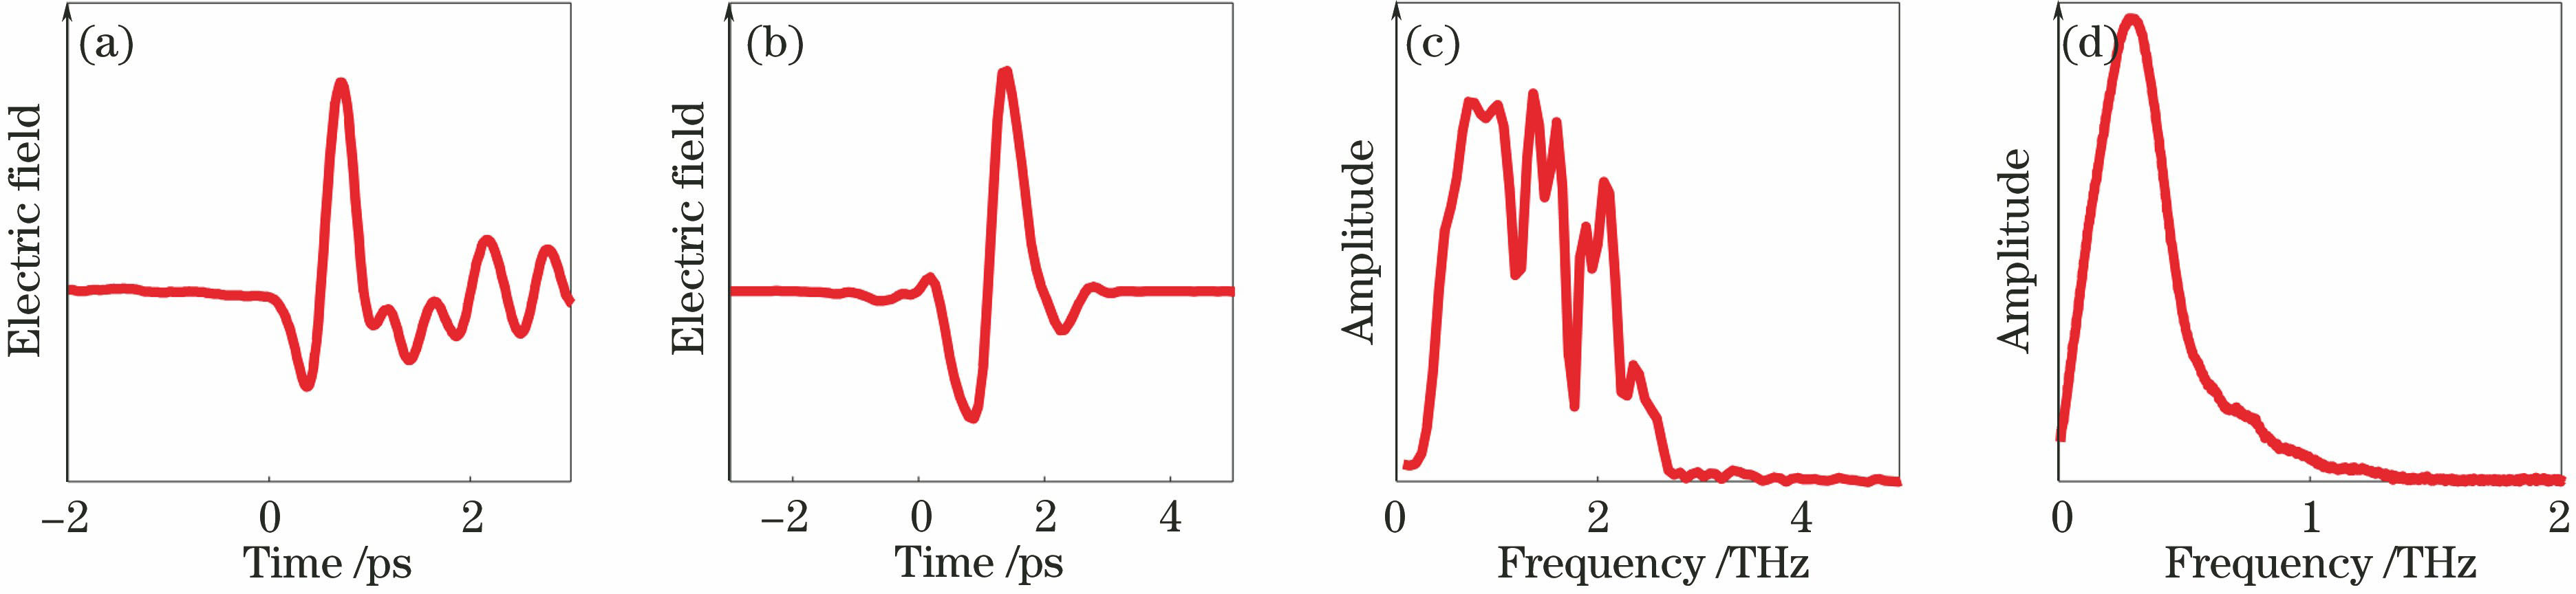 Experimental results[11-12]. (a) Time-domain waveform obtained by conventional THz measurement based on pump-probe technique; (b) time-domain waveform based on spectrum detection with chirped pulse; (c)frequency spectrum obtained by conventional THz measurement based on pump-probe technique; (d) frequency spectrum based on spectrum detection with chirped pulse